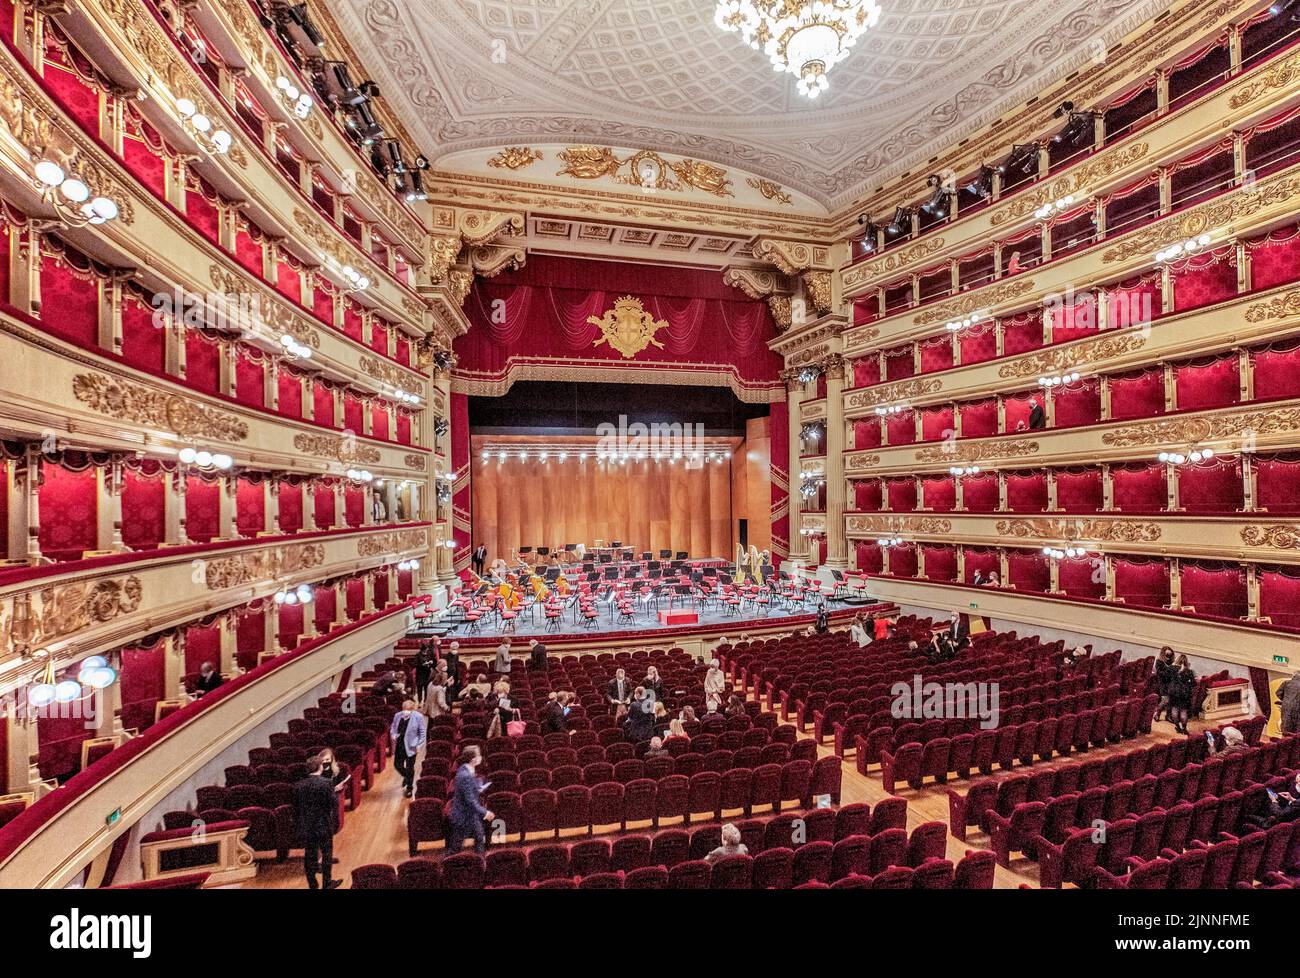 Auditorium, hall with stage at La Scala, Teatro alla Scala, Milan, Lombardy, Northern Italy, Italy Stock Photo